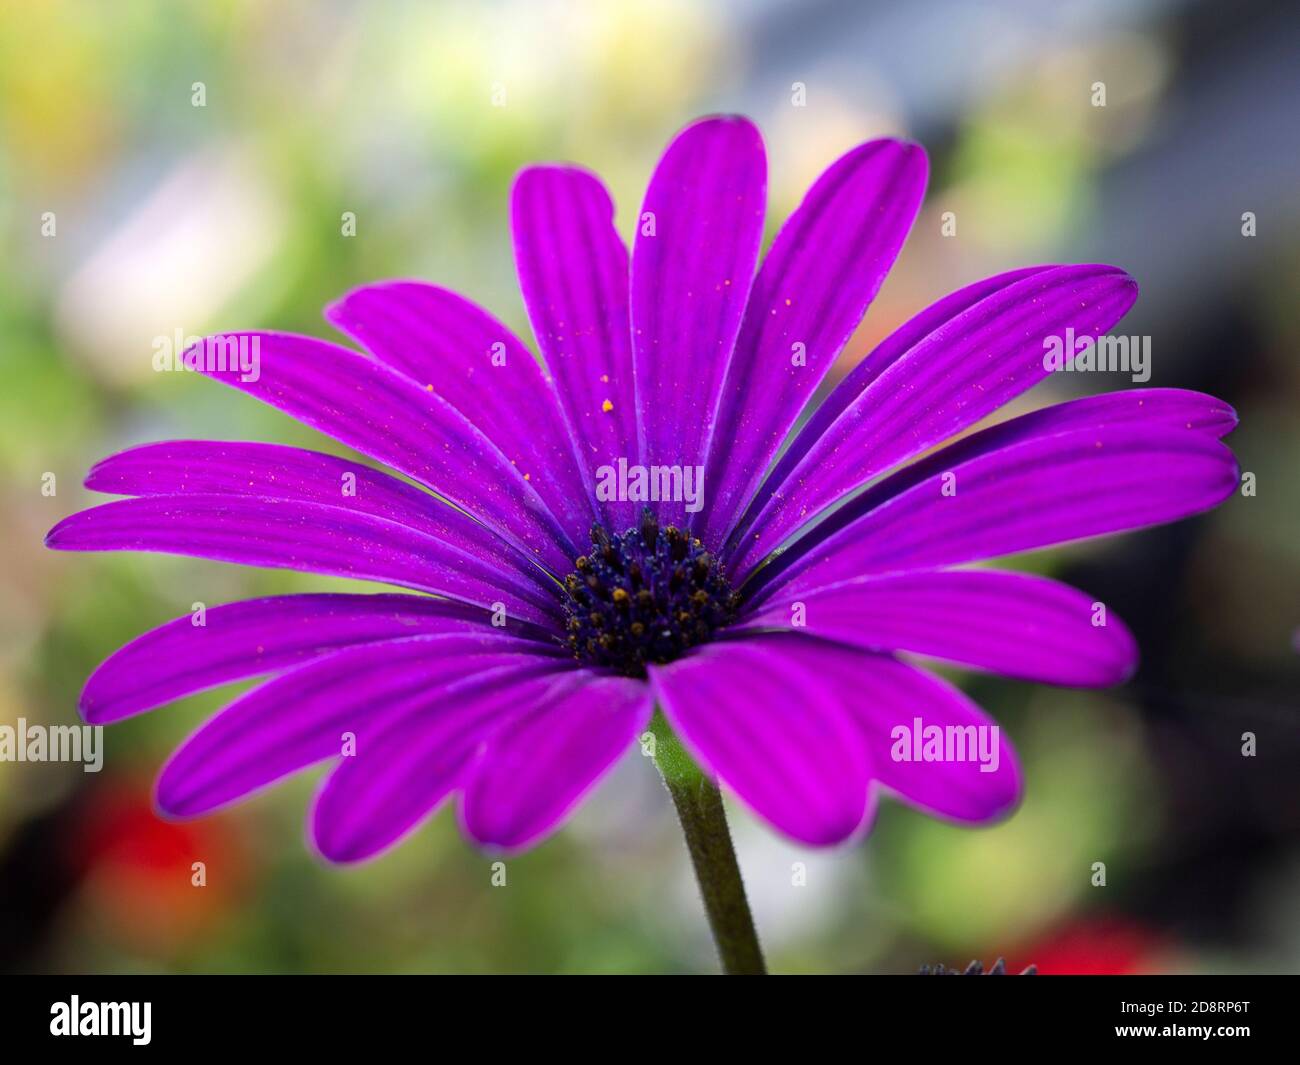 Close-up of purple flower of Cape Marguerite (Dimorphotheca ecklonis); petals speckled with pollen Stock Photo